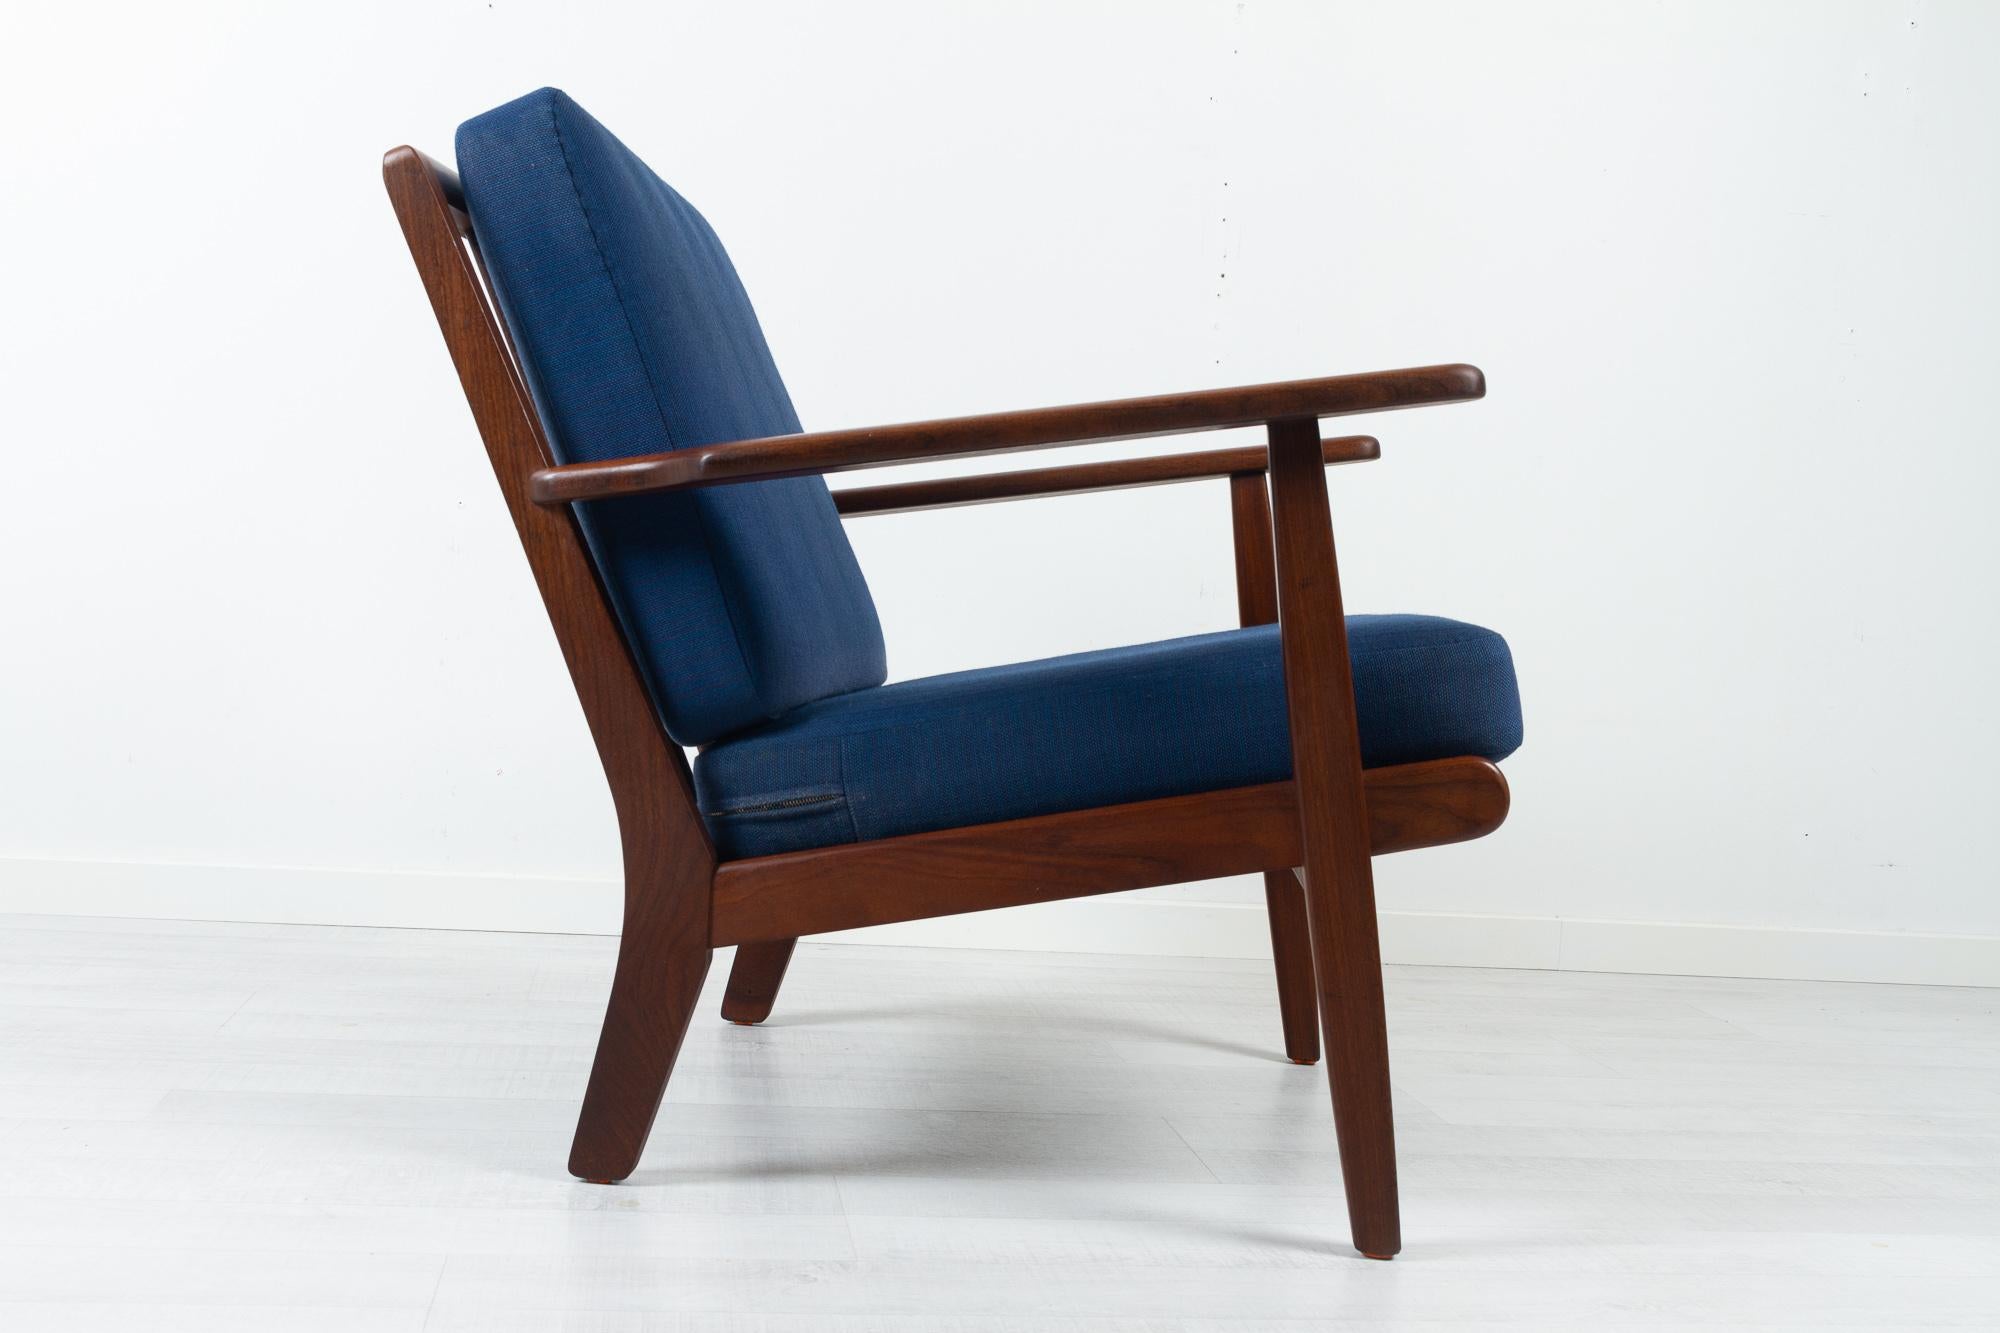 Vintage Danish lounge chair GE-88 by Aage Pedersen for GETAMA Denmark 1960s.
Danish modern lounge chair model GE88 designed by the owner of the GETAMA furniture factory Aage Pedersen. 
This easy chair is made in solid teak with Epeda spring